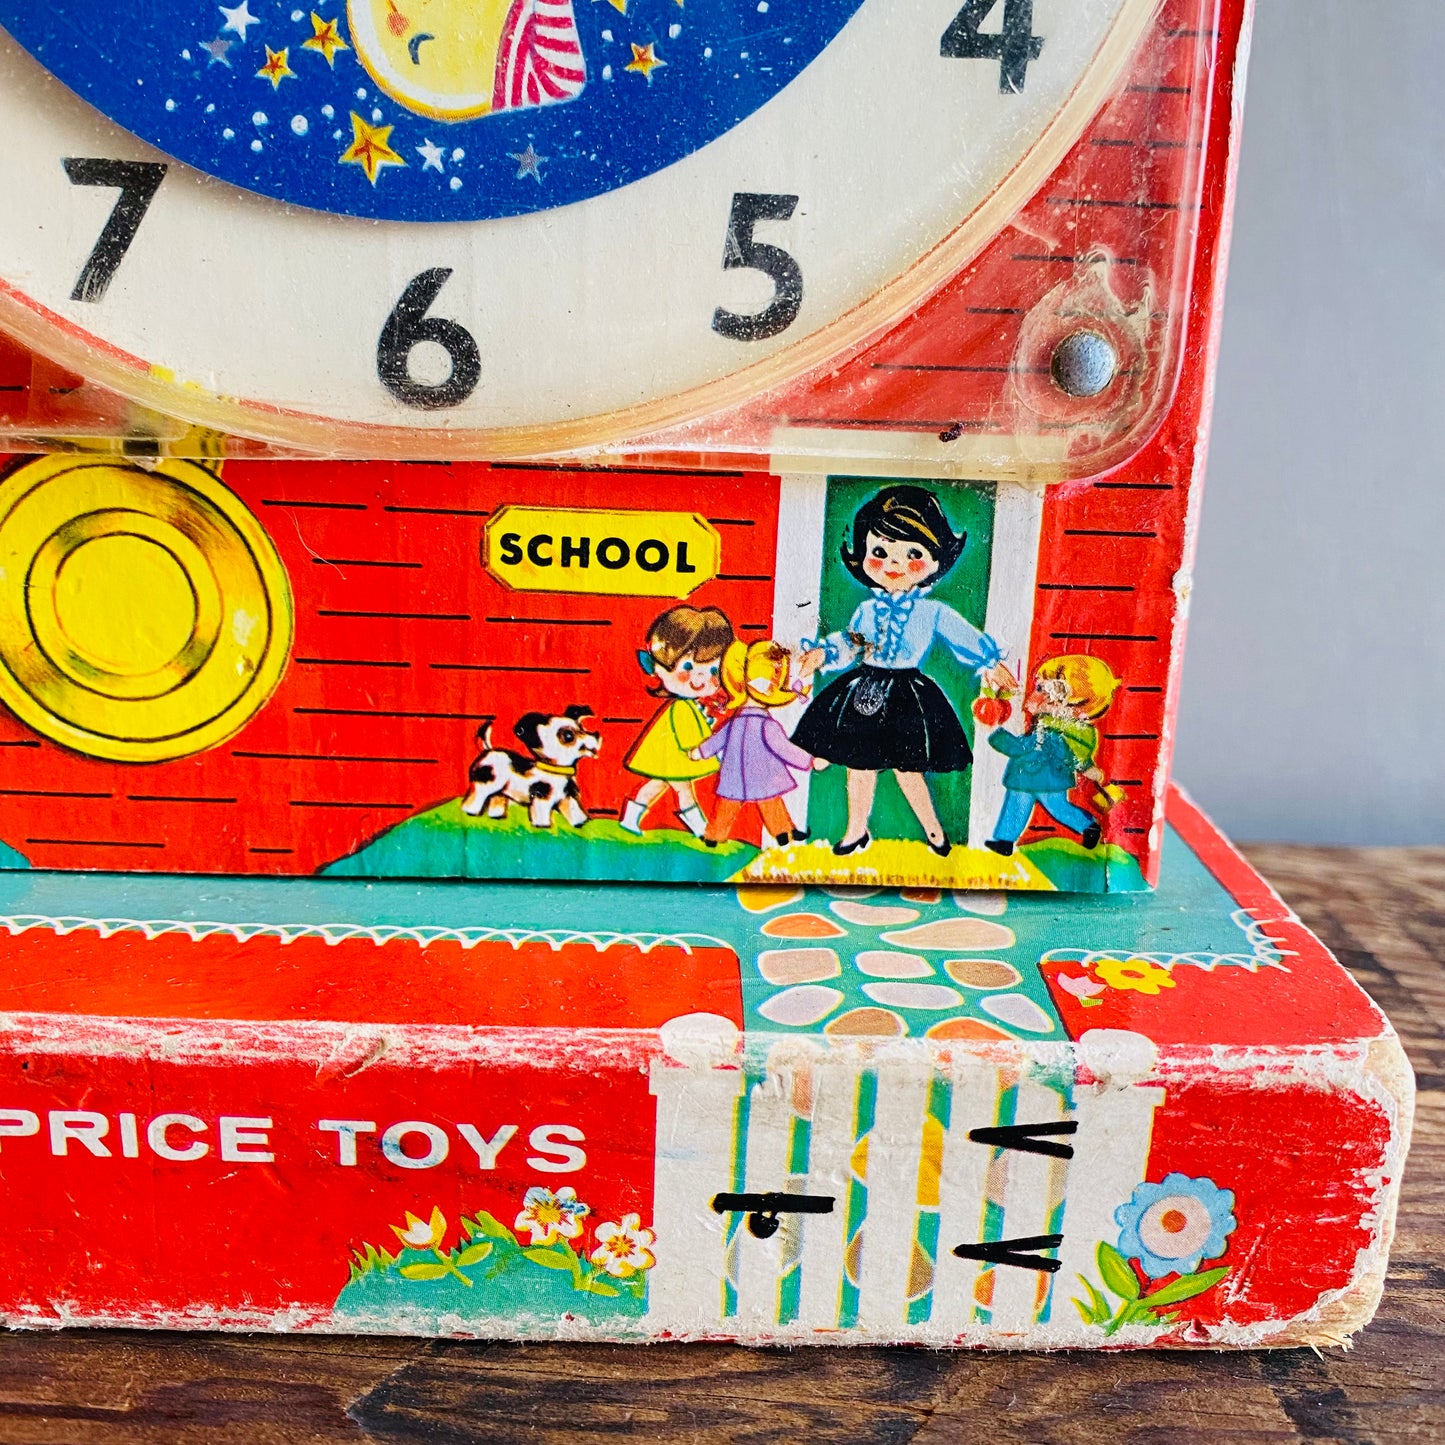 【1960s USA vintage】FISHER PRICE MusicBox